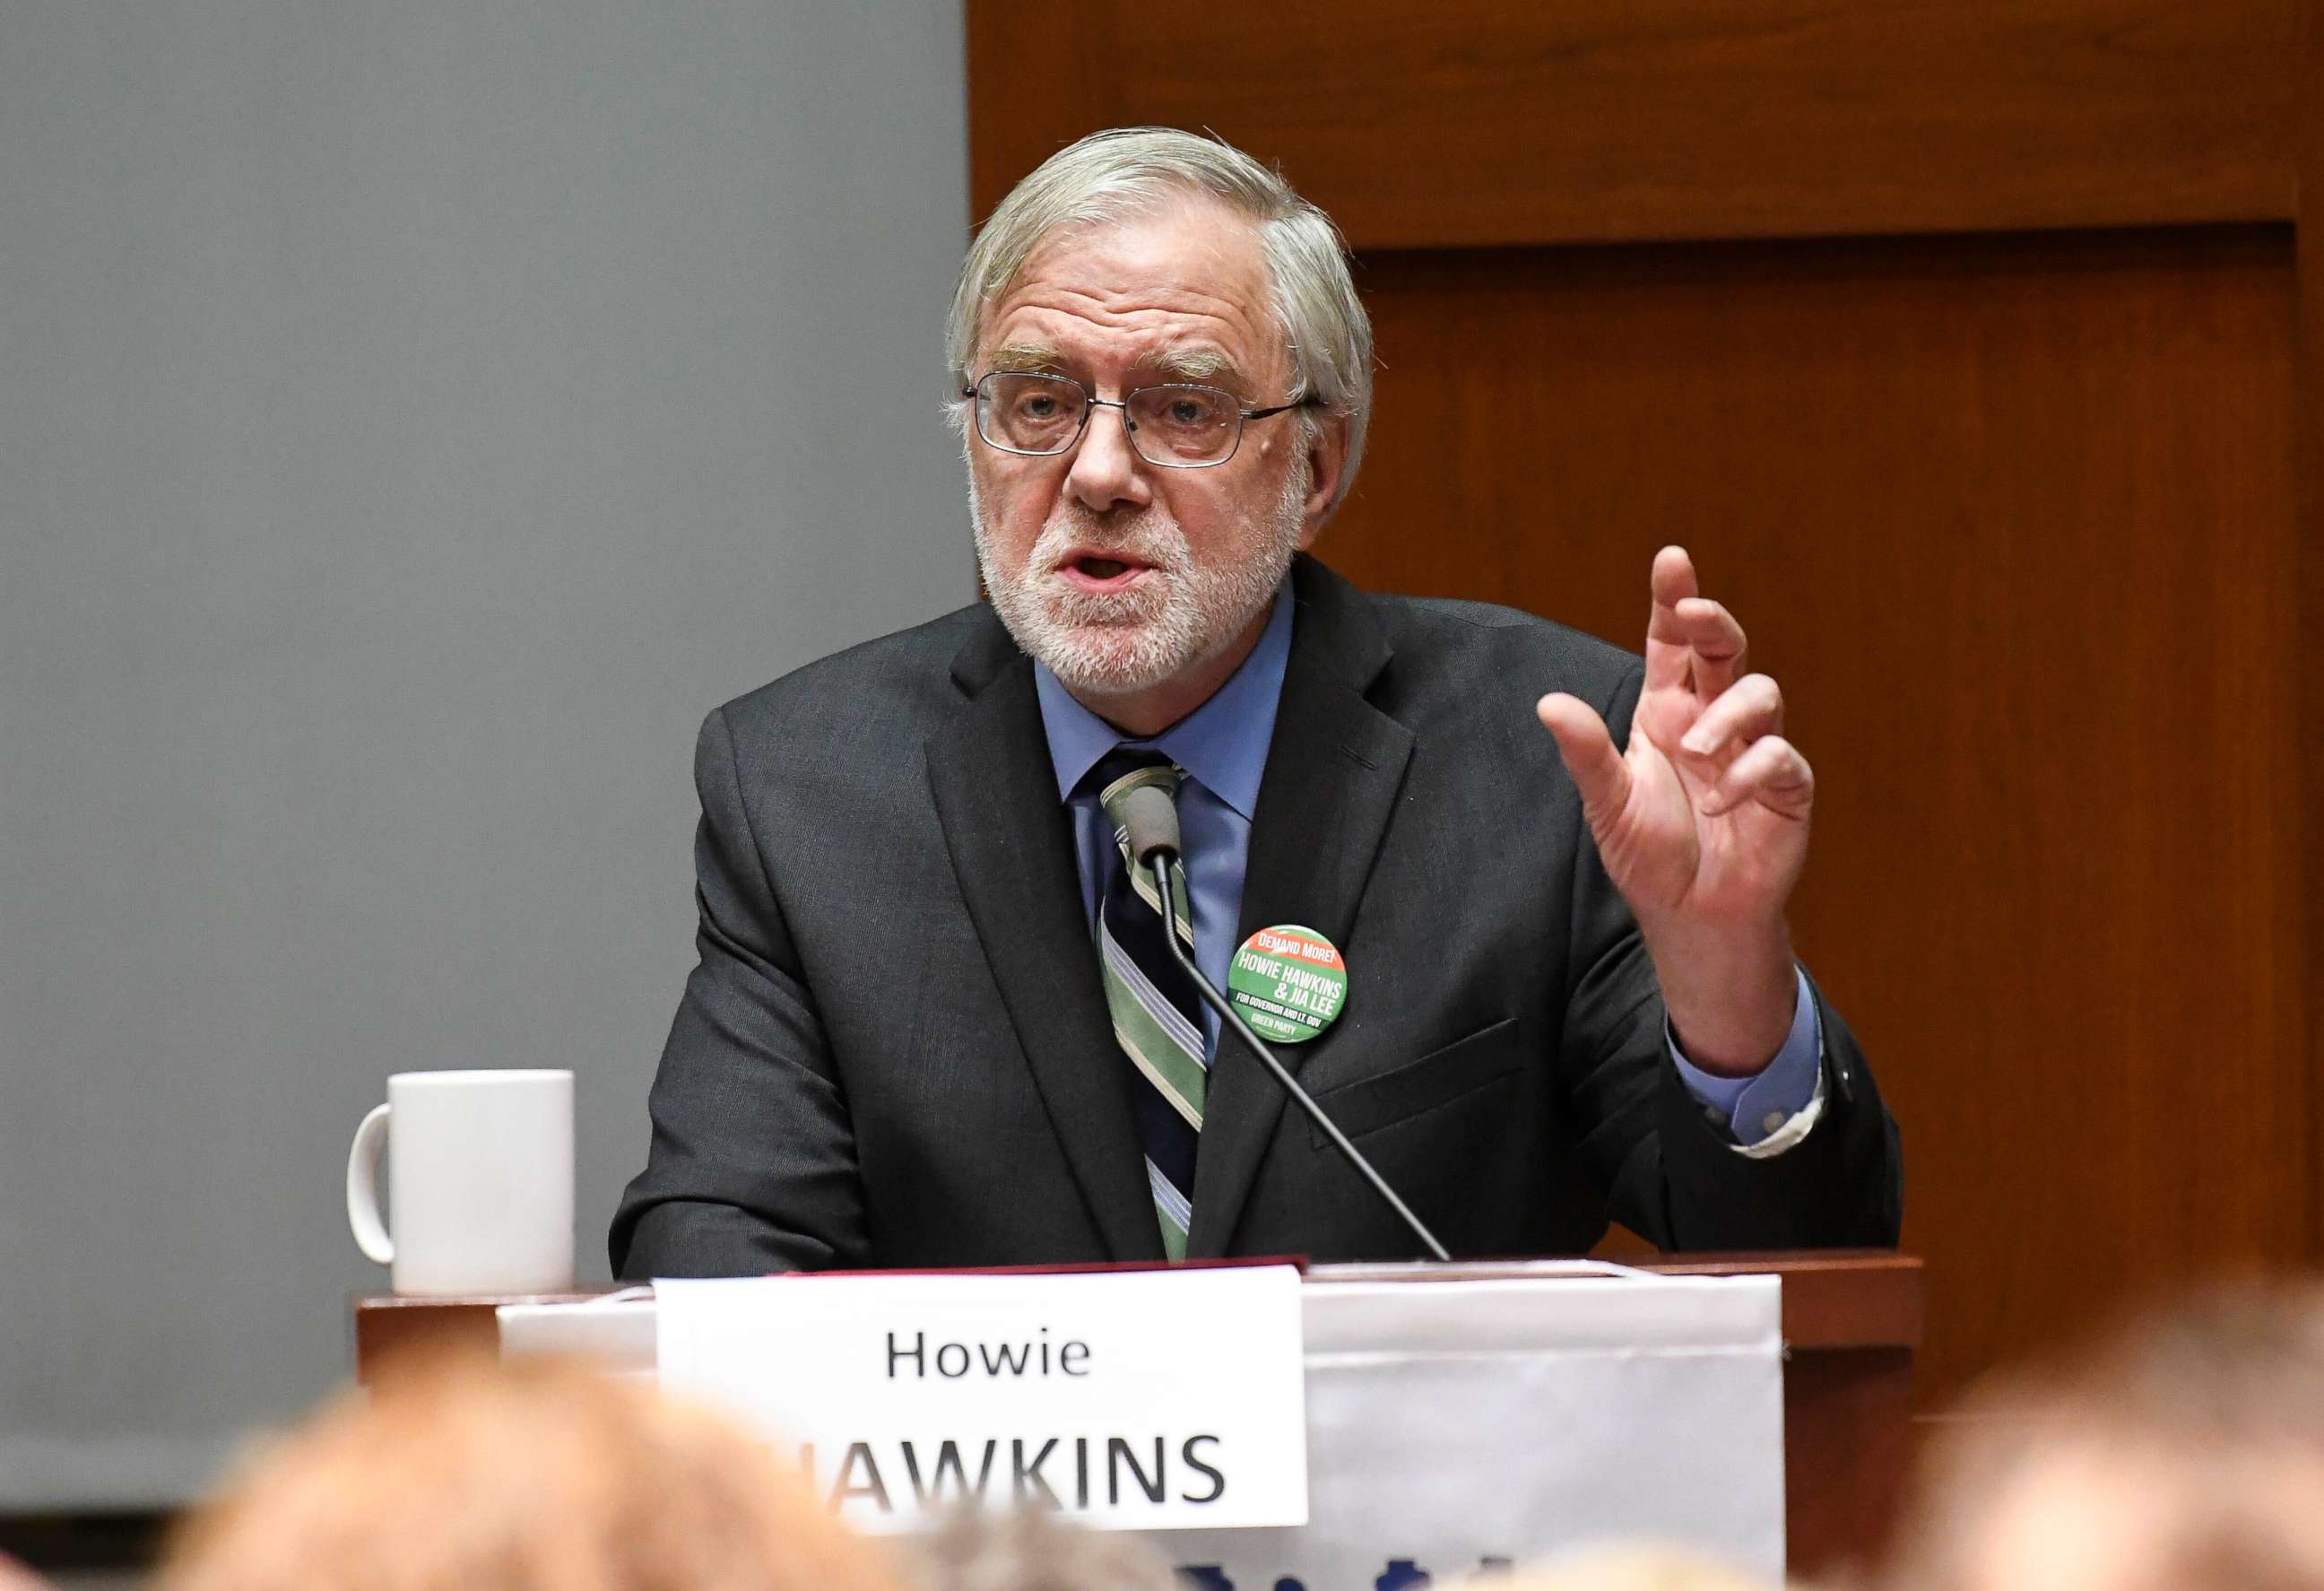 PHOTO: Green Party gubernatorial candidate, Howie Hawkins, takes part in a debate sponsored by the League of Women Voters at The College of Saint Rose in Albany, N.Y., Nov. 1, 2018.